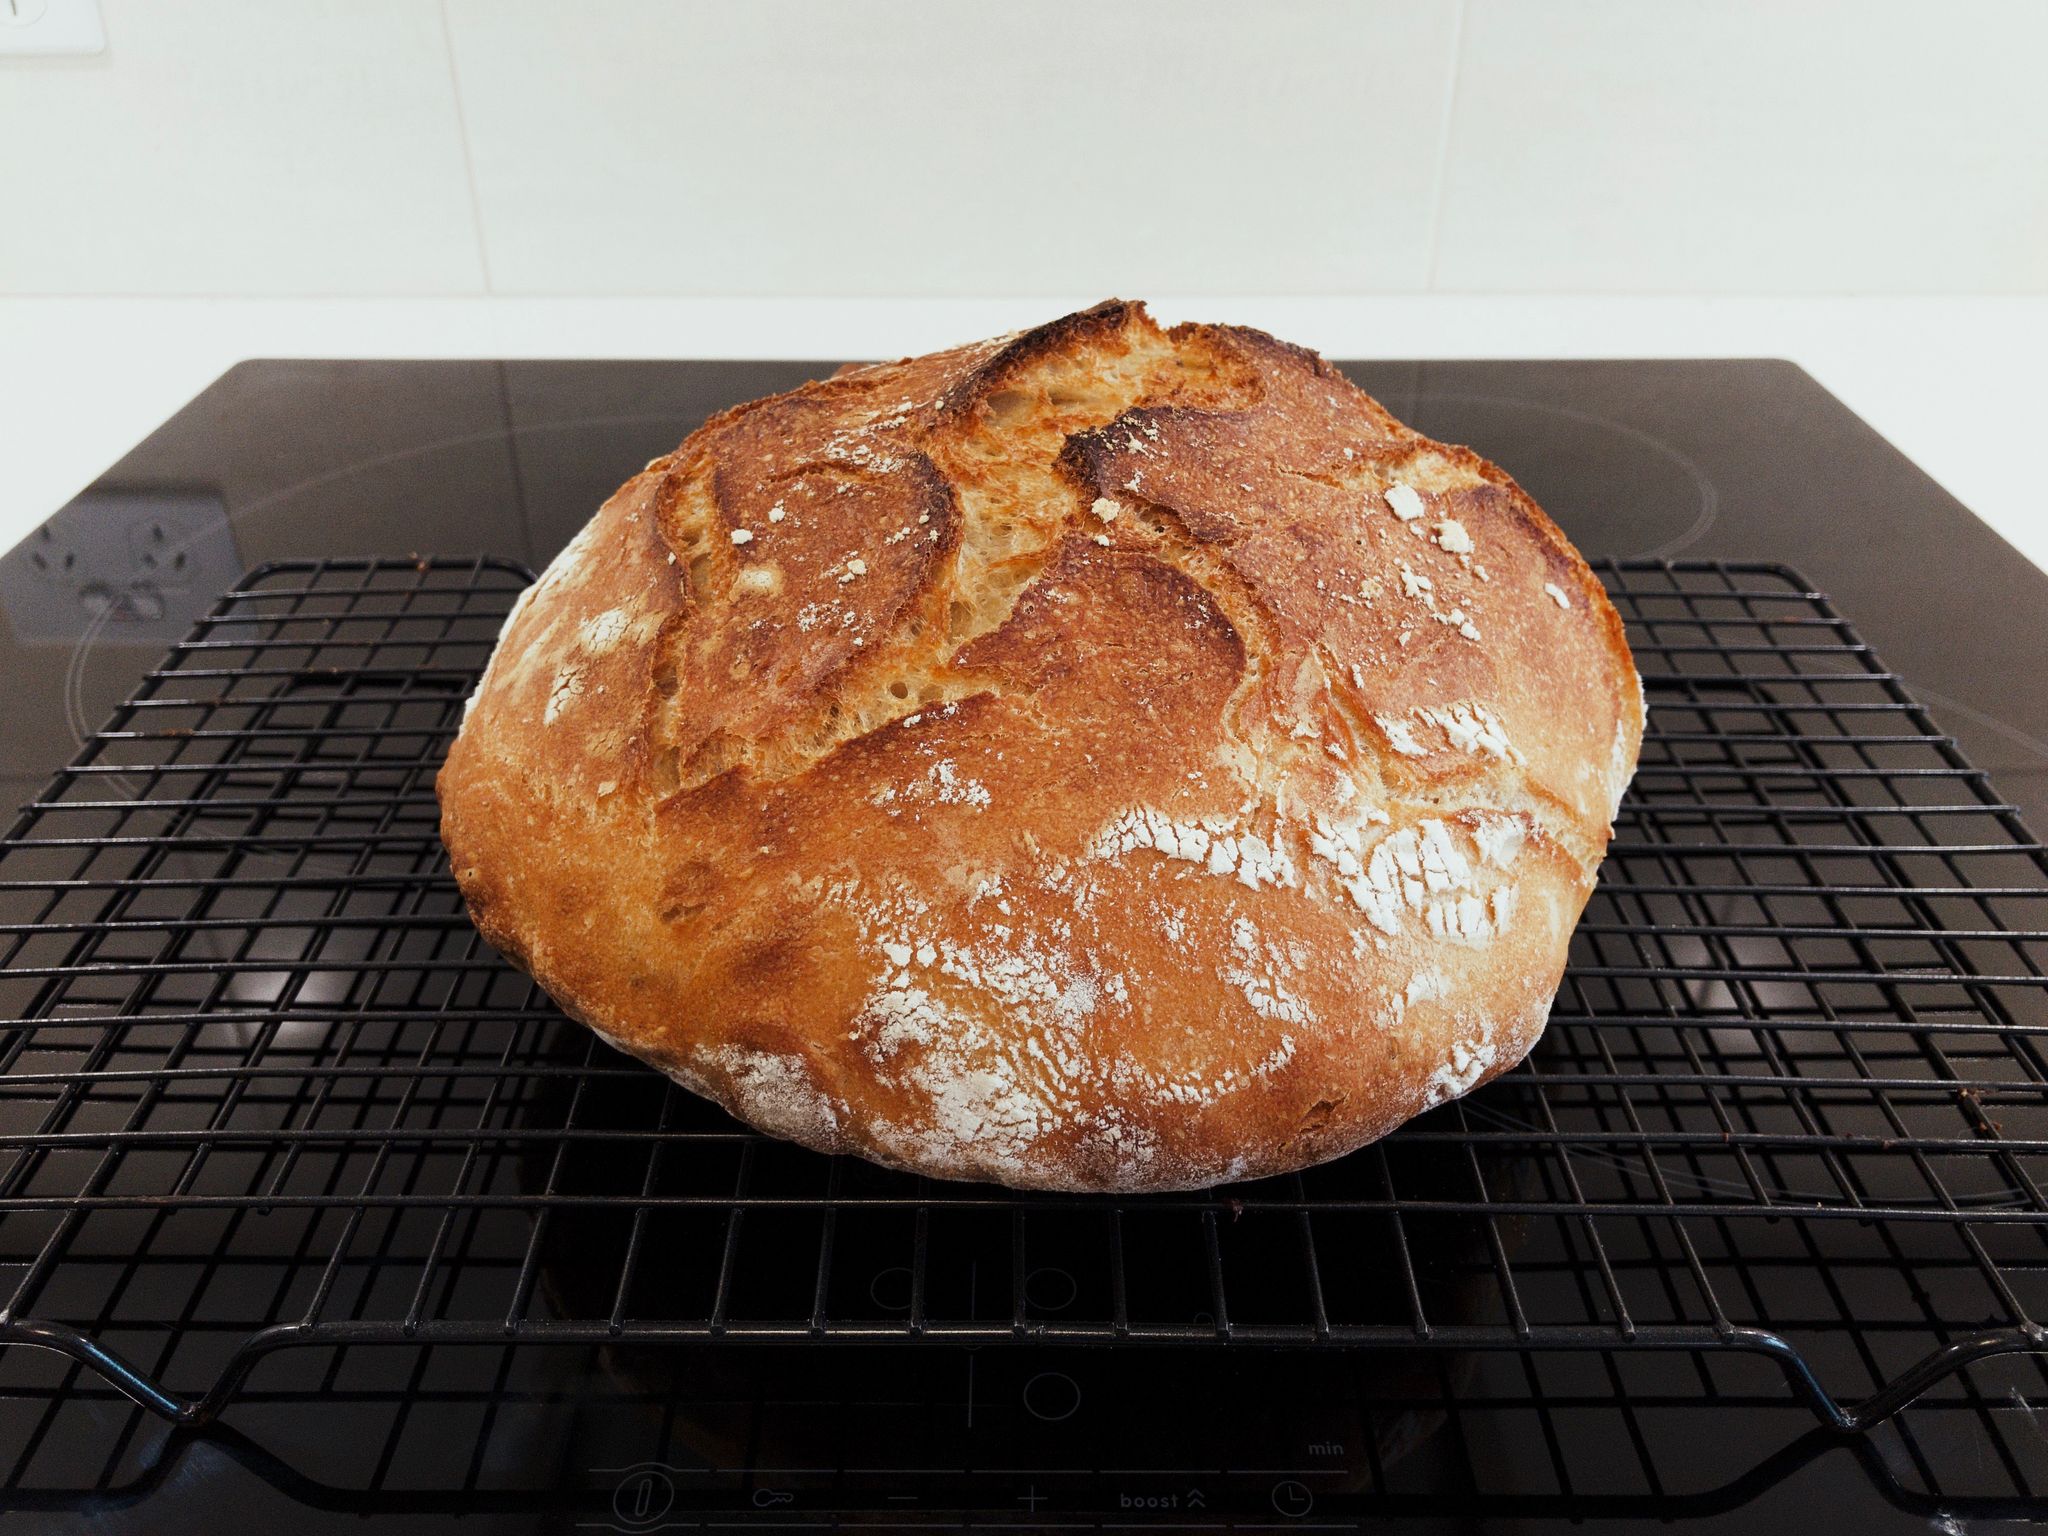 A brown absolutely delicious-looking round loaf of bread sitting on a cooling rack.